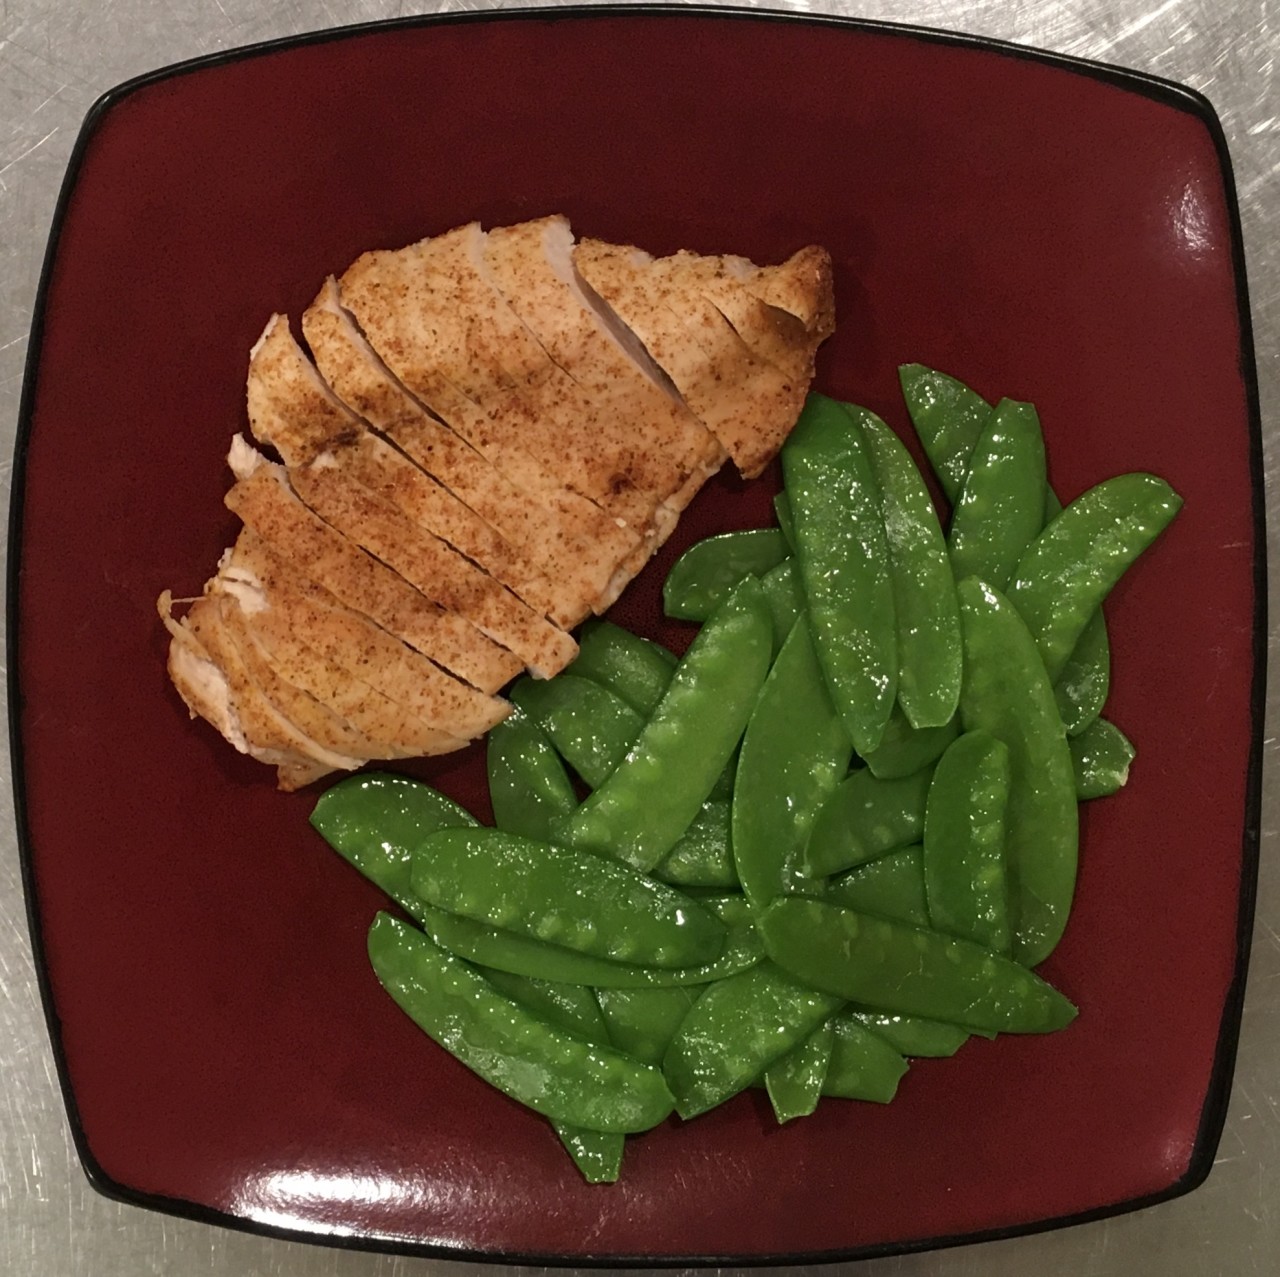 <a class="bx-tag" rel="tag" href="https://streetloc.com/view-channel-profile/whatsfordinner"><s>#</s><b>whatsfordinner</b></a> Grilled Chicken and Butter Sautéed Snow Peas